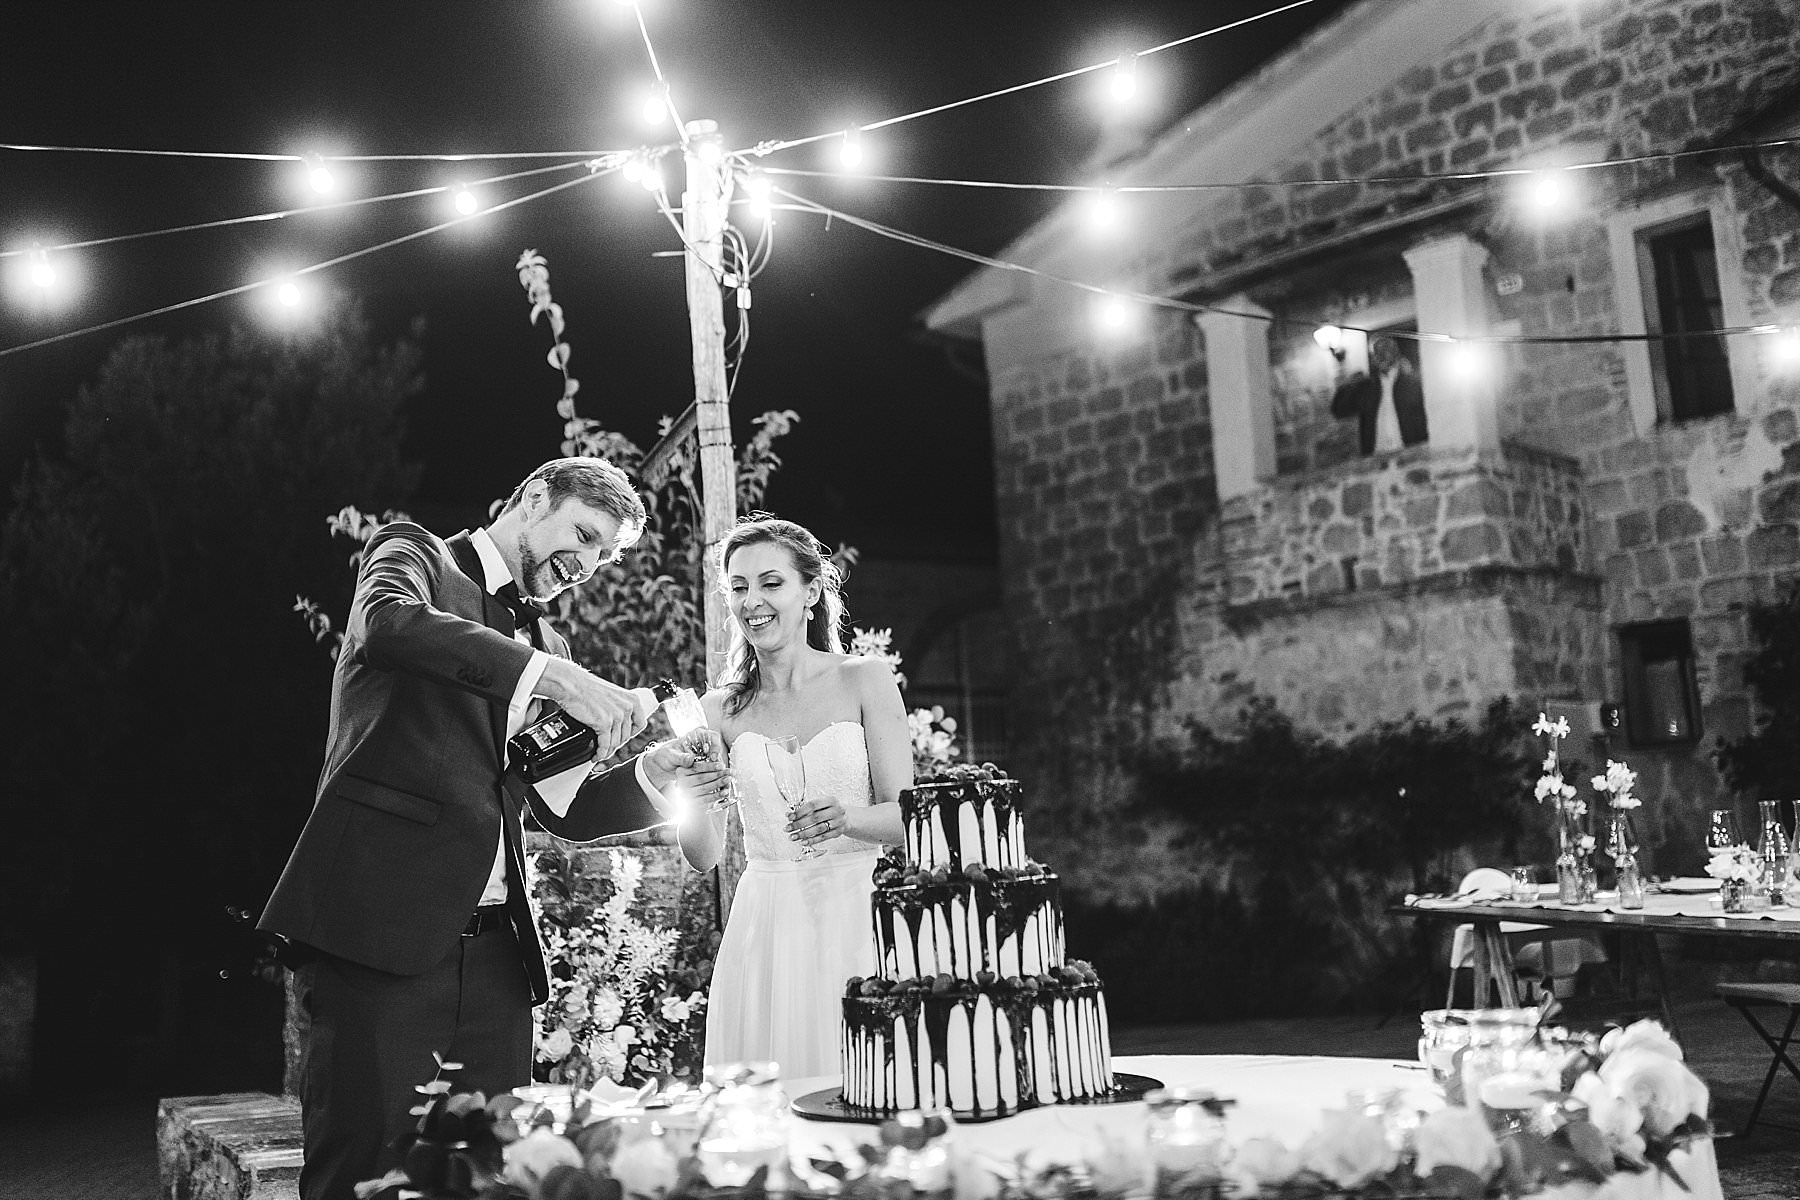 Exciting and fun wedding cut of the cake at Tenuta di Papena estate in the countryside of Tuscany near Siena